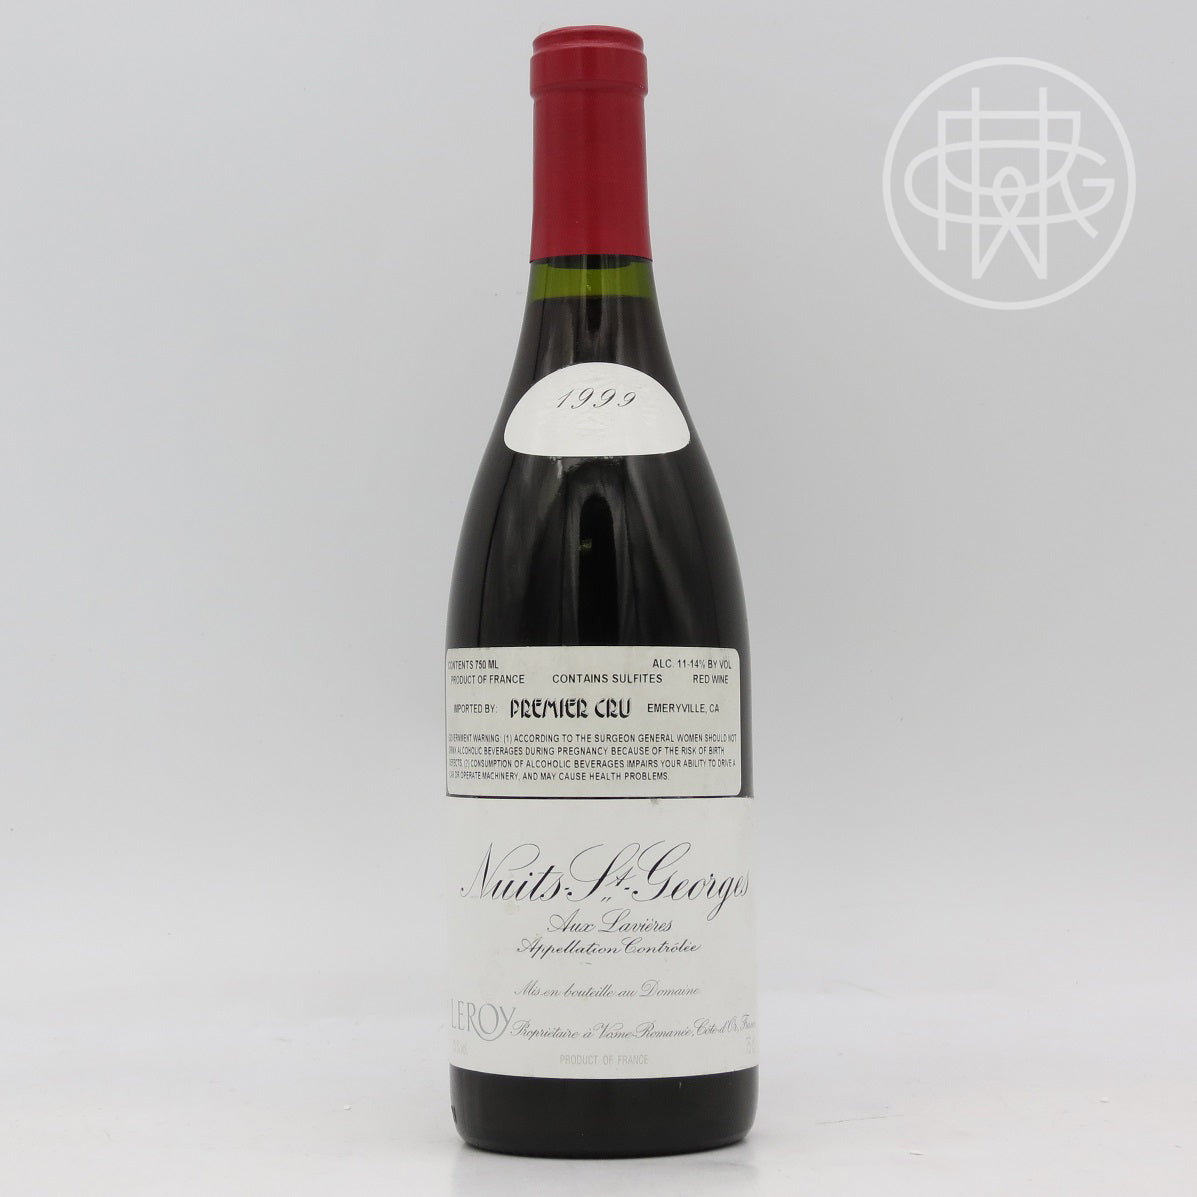 Leroy Nuits St. Georges Lavieres 1999 750mL (Slightly Soiled Label)